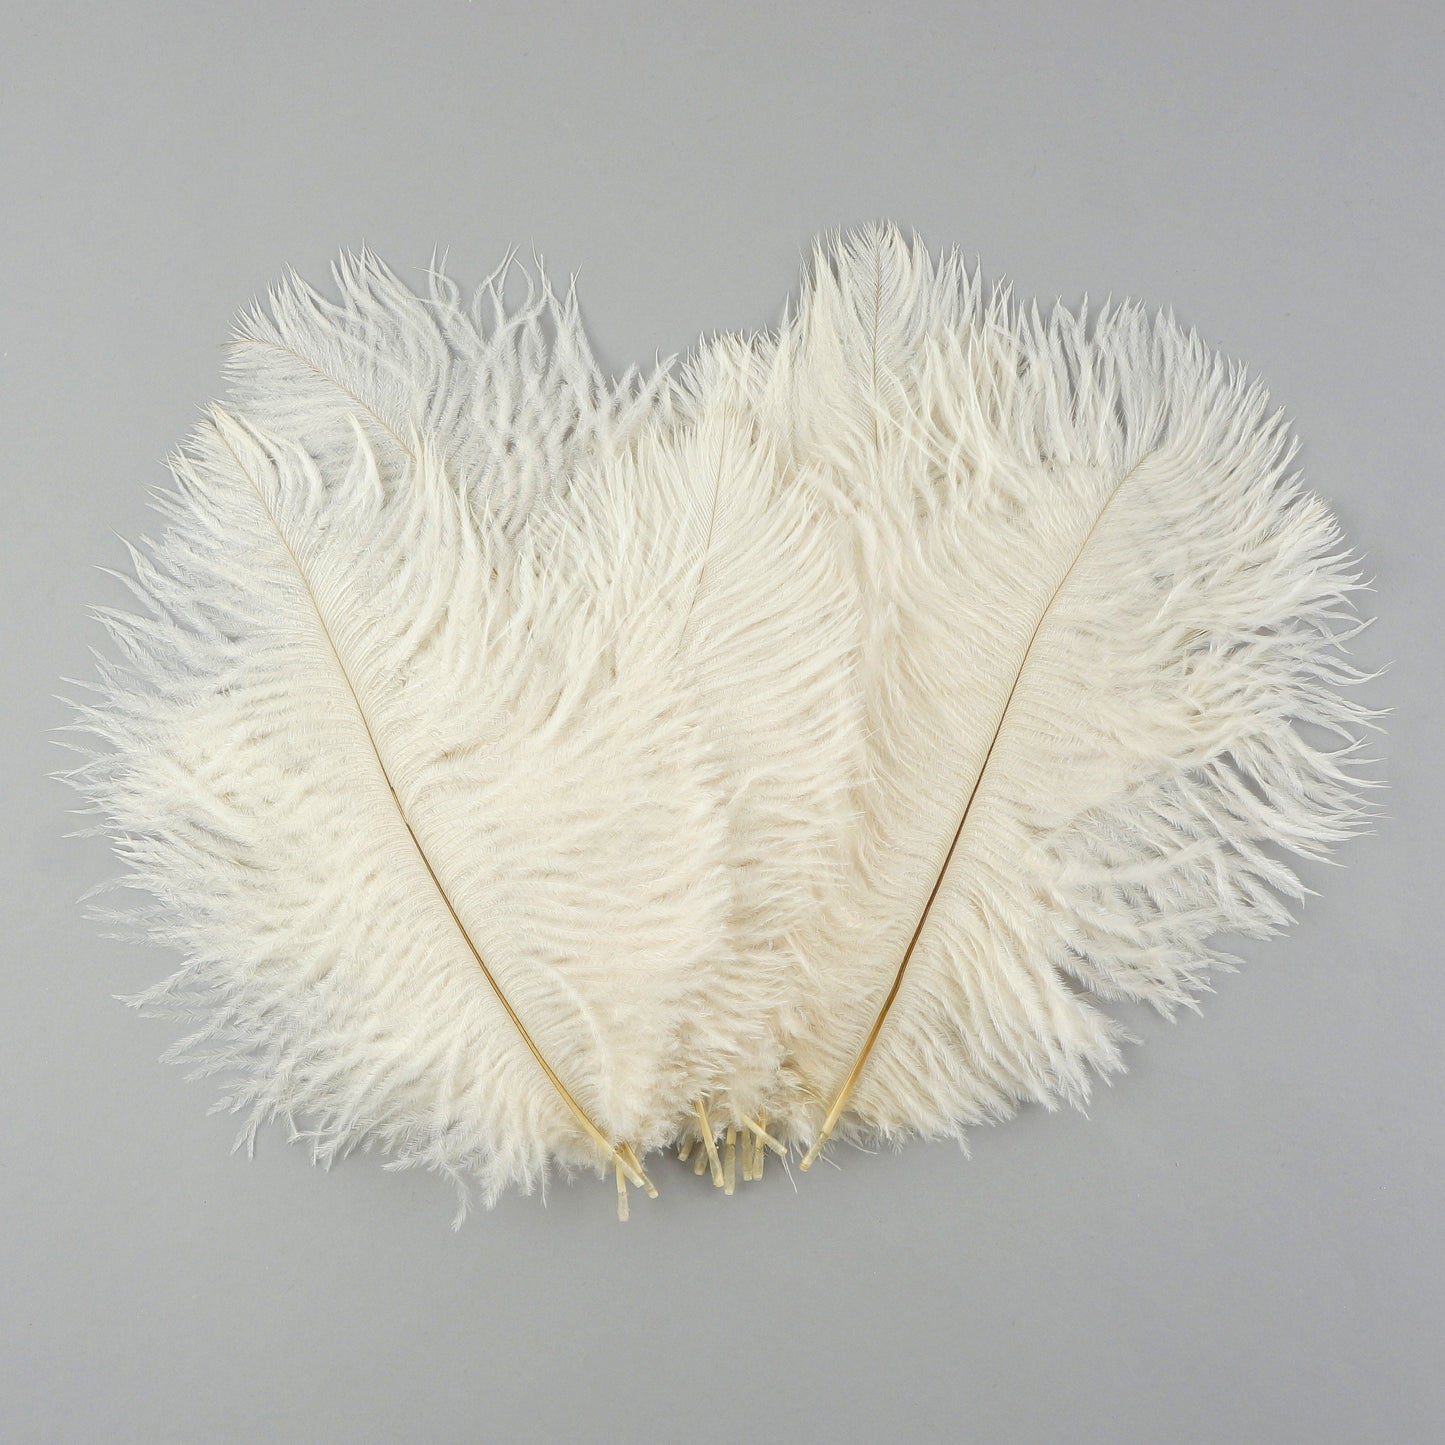 Ostrich Feathers 4-8" Drabs - Ivory